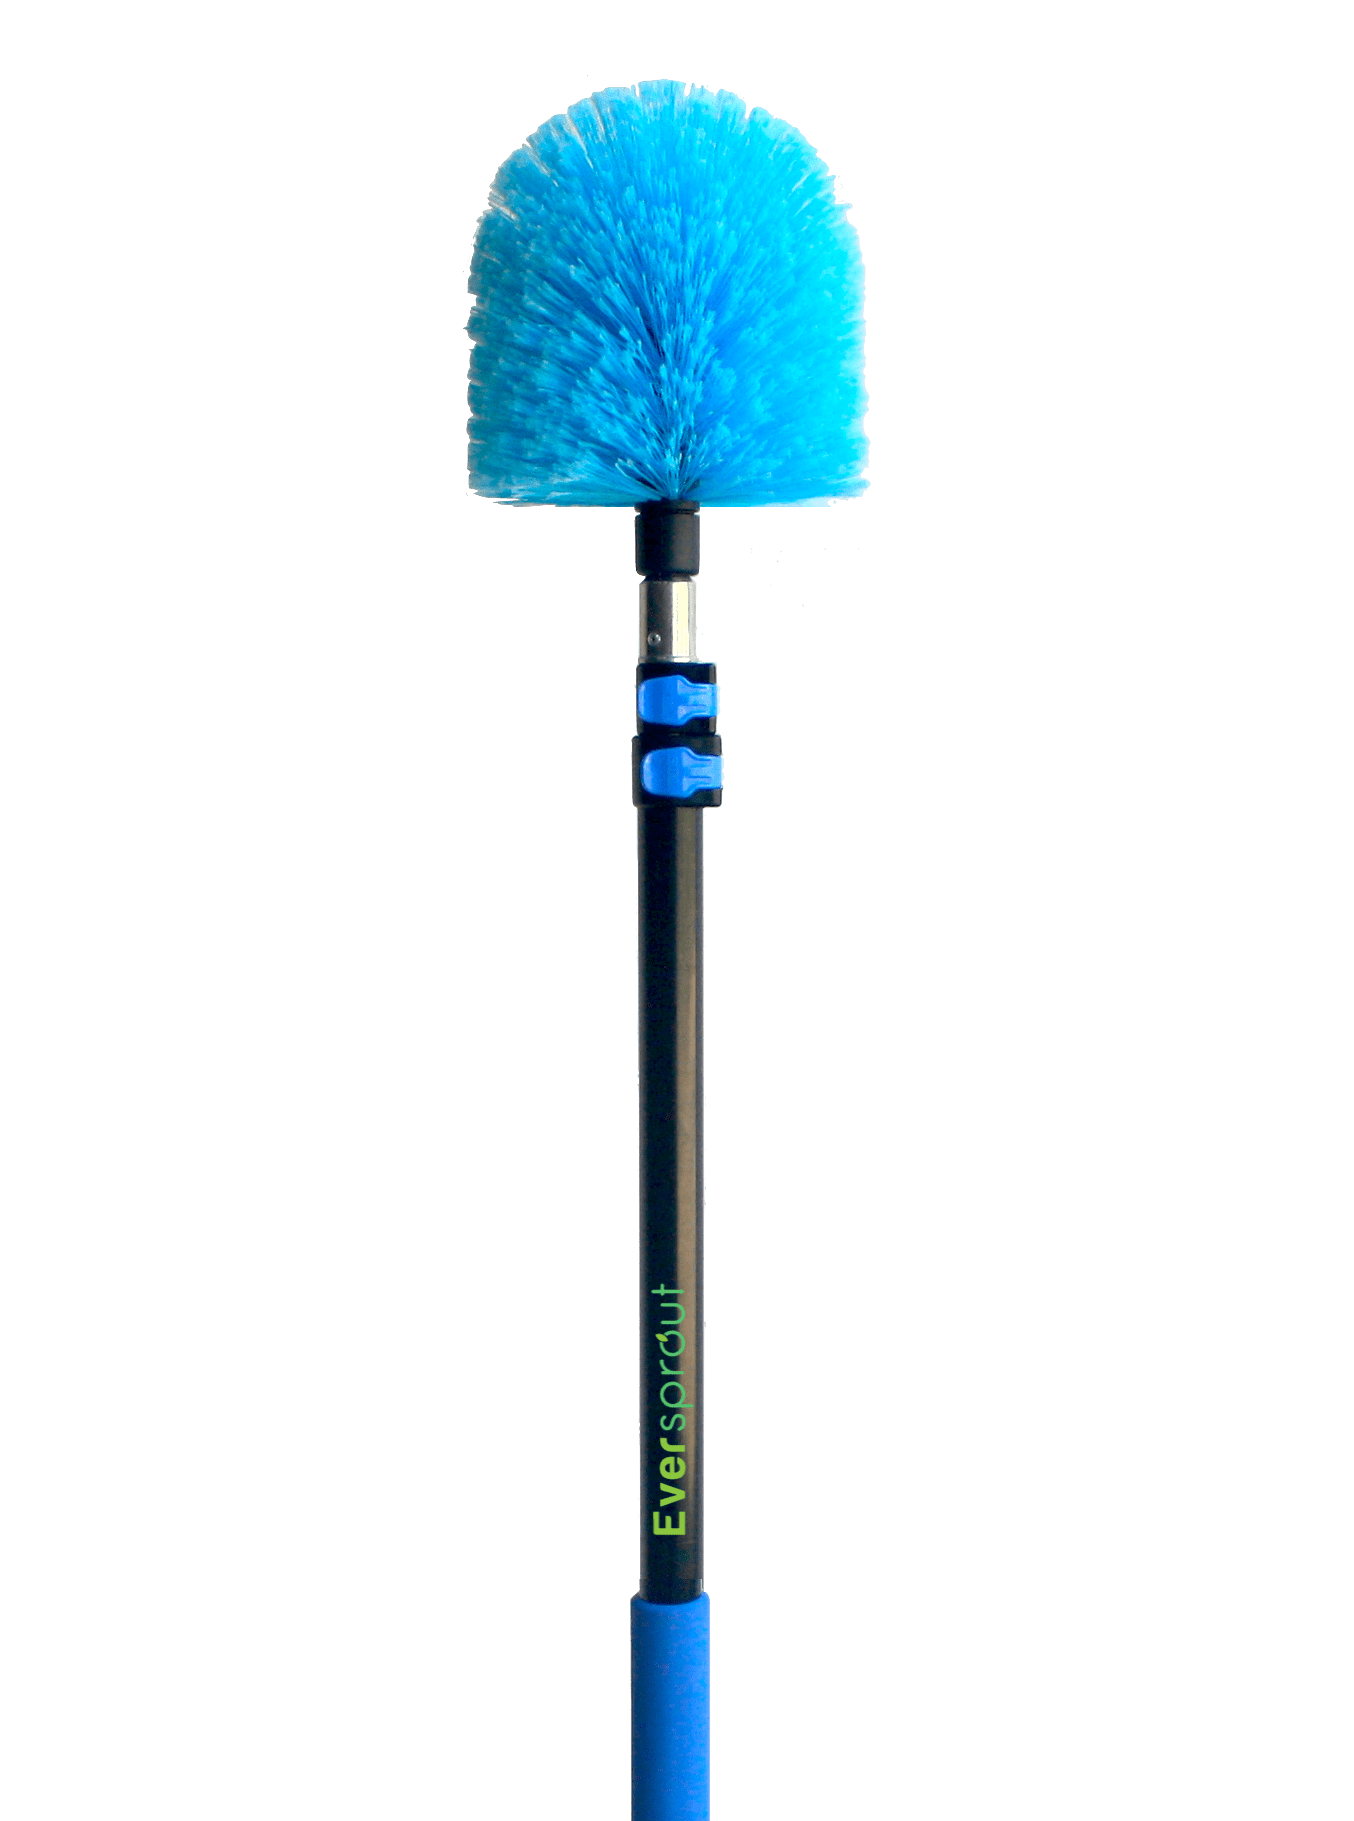 Eversprout 5-to-12 Foot Cobweb Duster and Extension-Pole Combo (20 Foot Reach, Soft Bristles) | Hand Packaged | Lightweight, 3-S